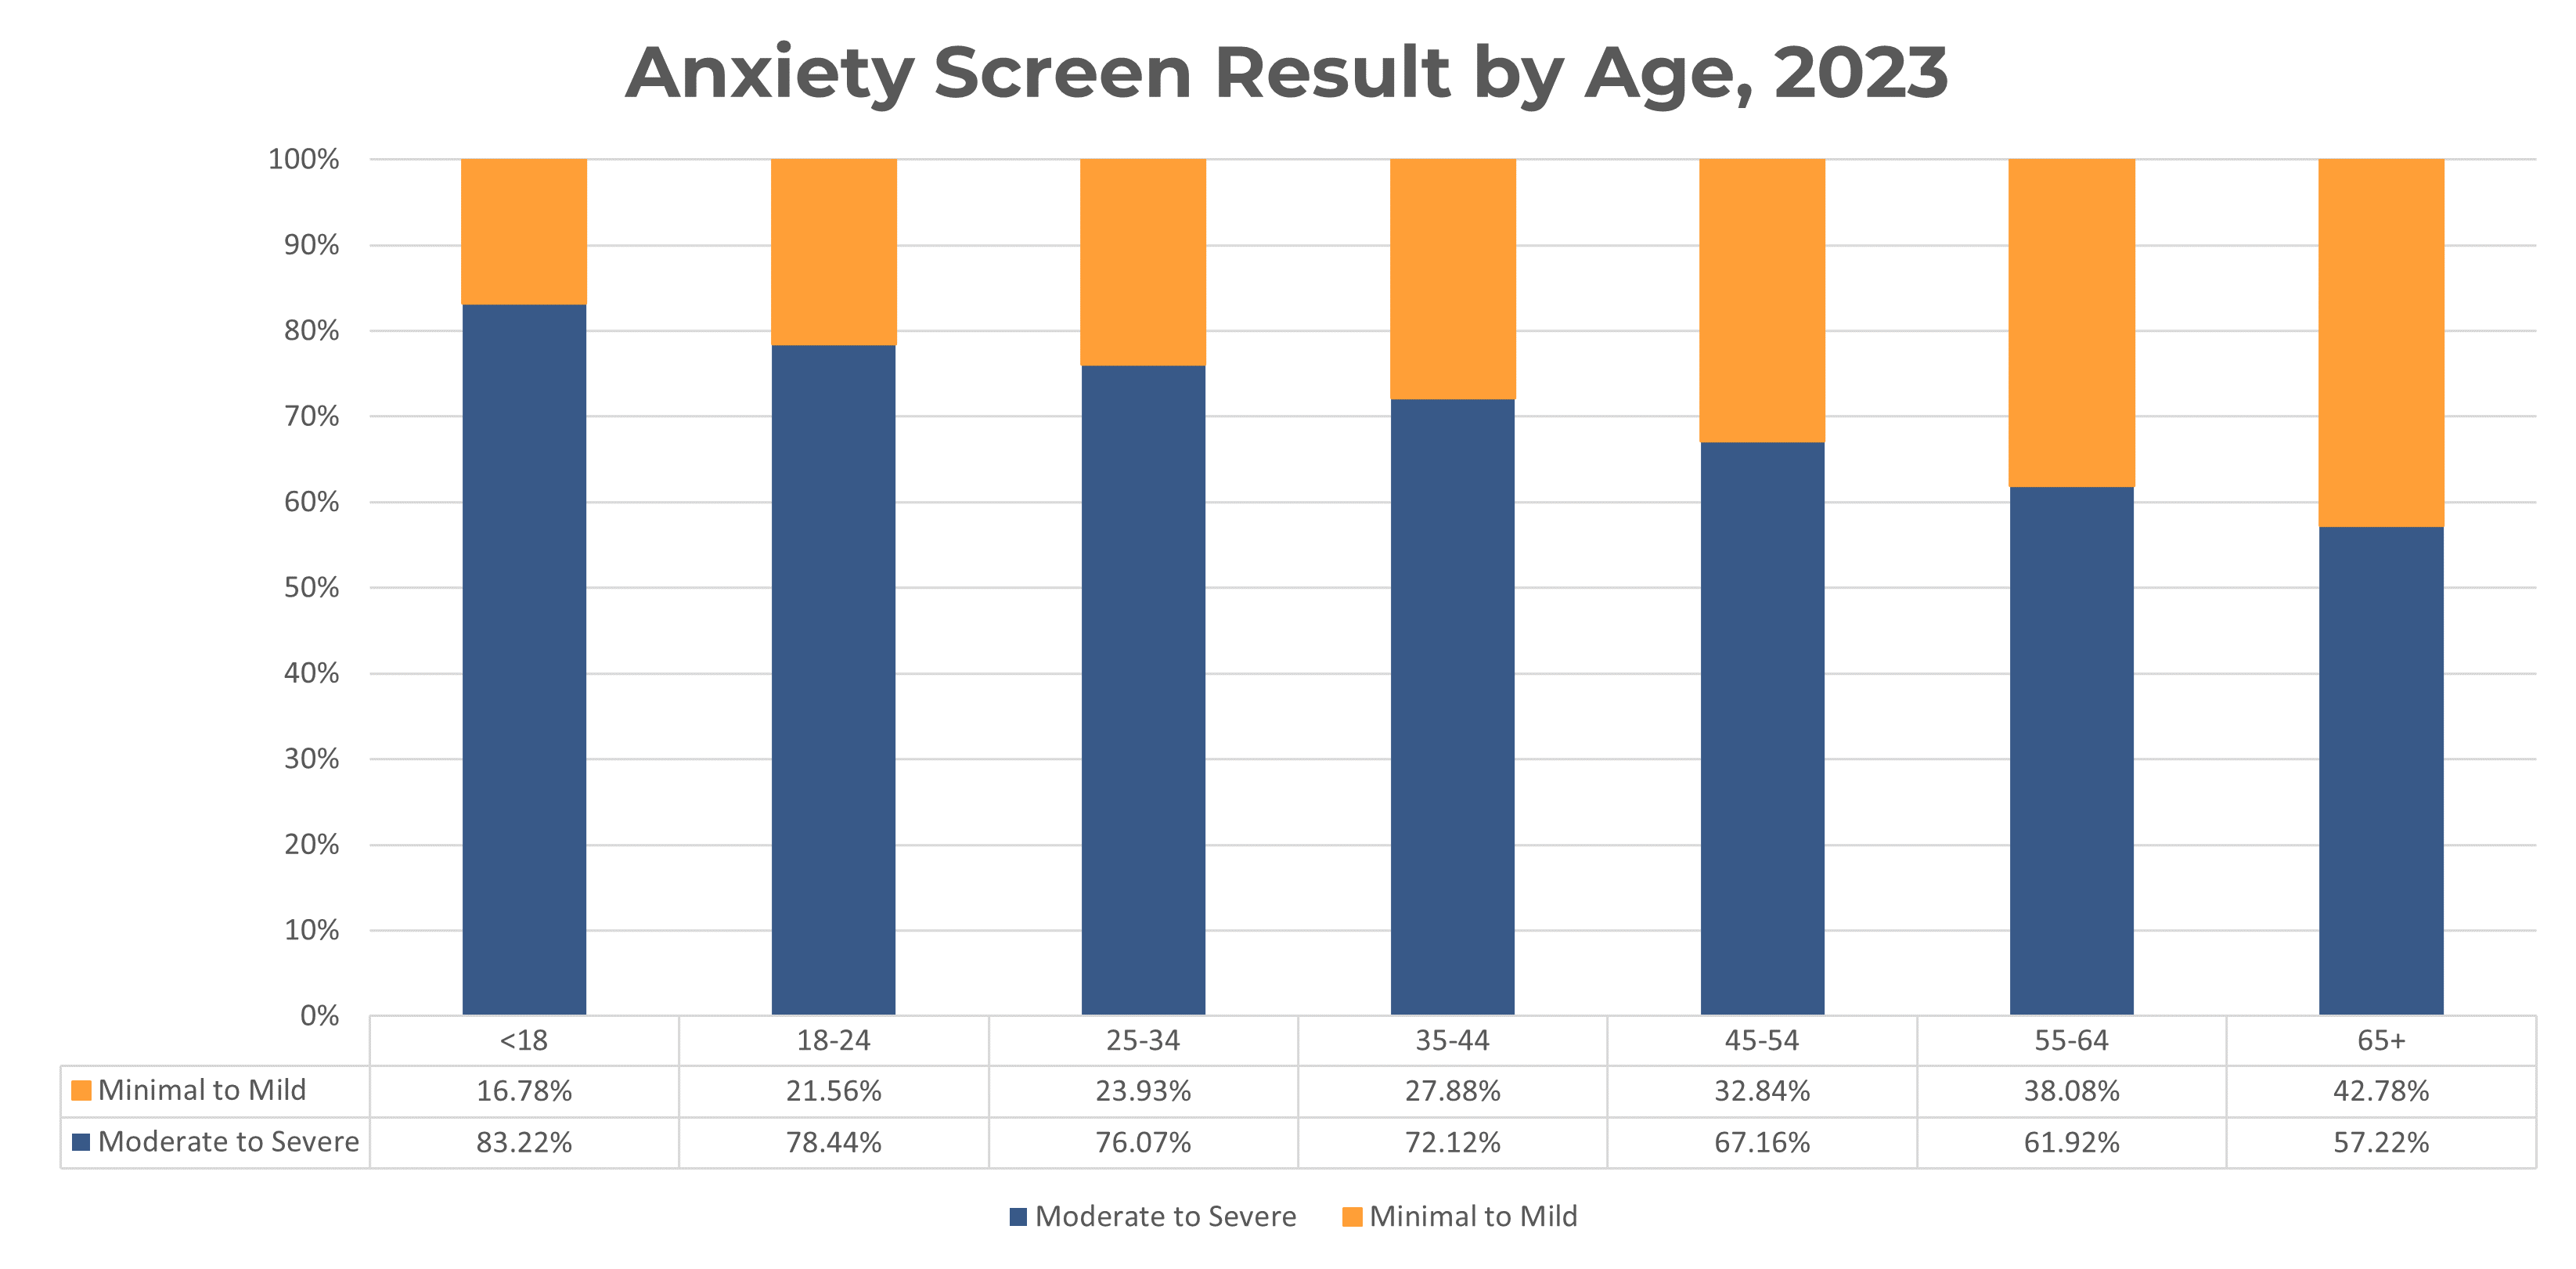 Bar graph comparing screening severity for anxiety per age group in 2023. Screeners were categorized as minimal to mild or moderate to severe.